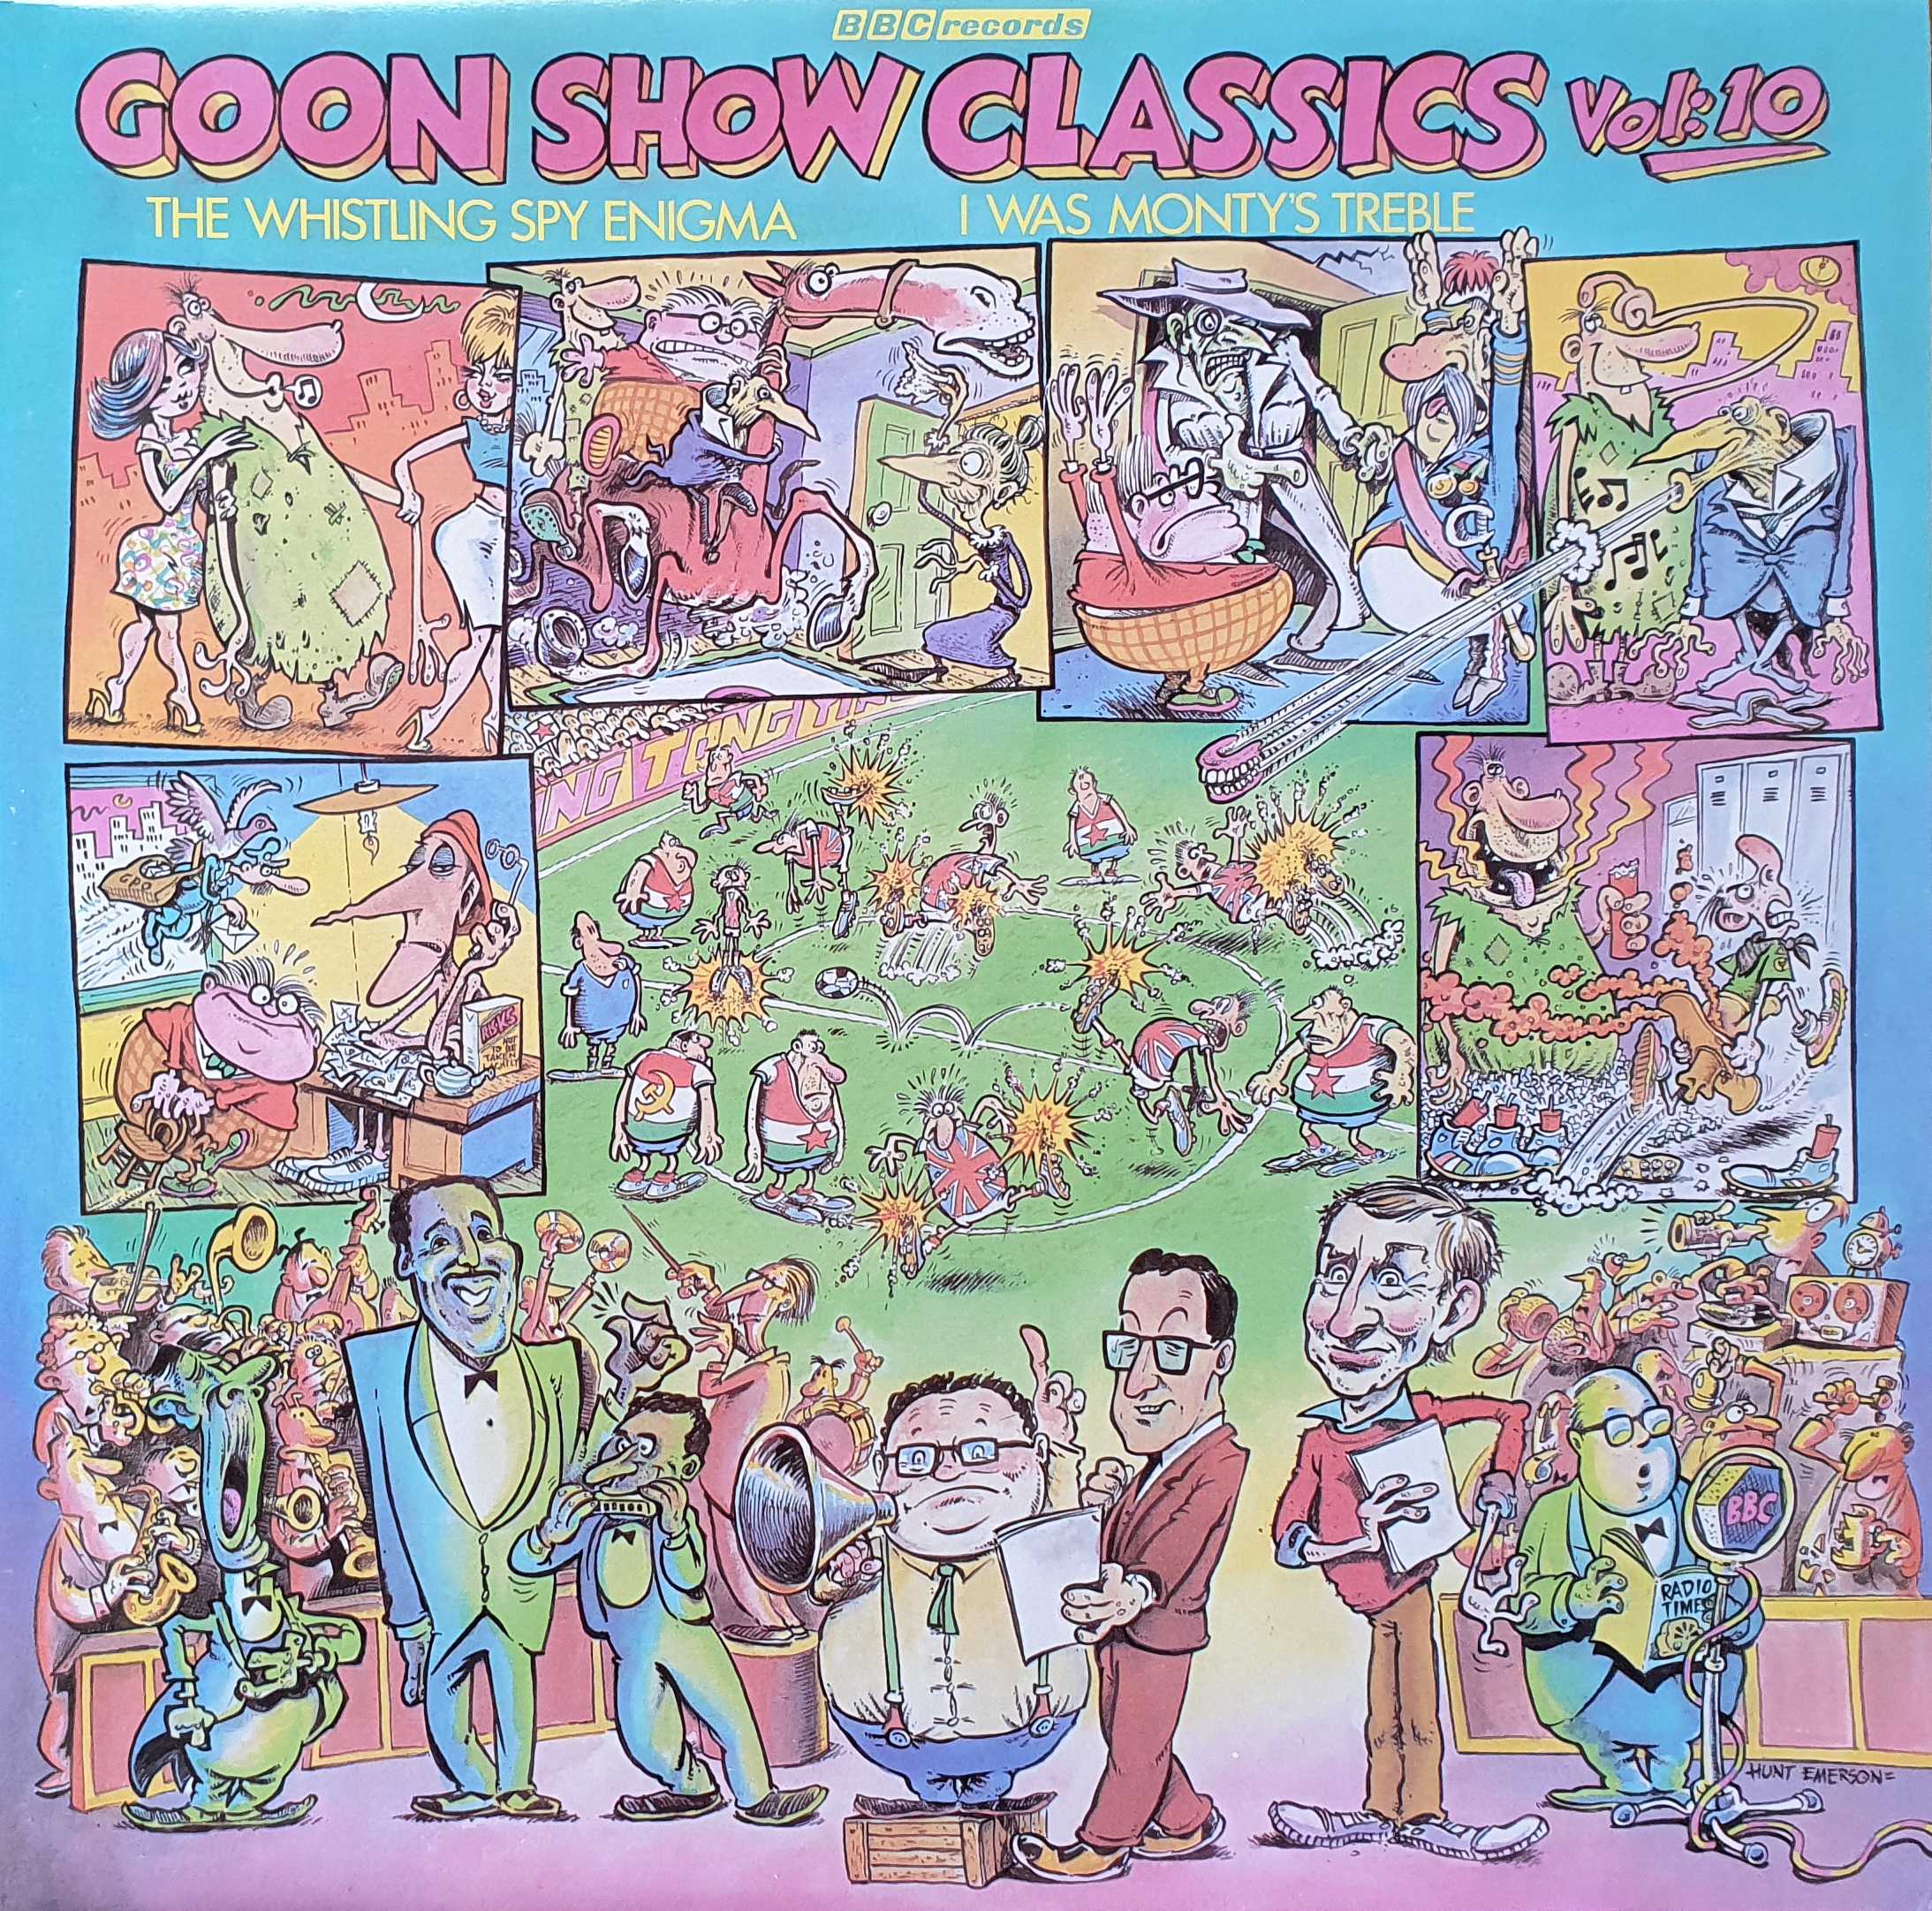 Picture of 815 433-1 Goon show classics - Volume 10 by artist Spike Milligan from the BBC albums - Records and Tapes library